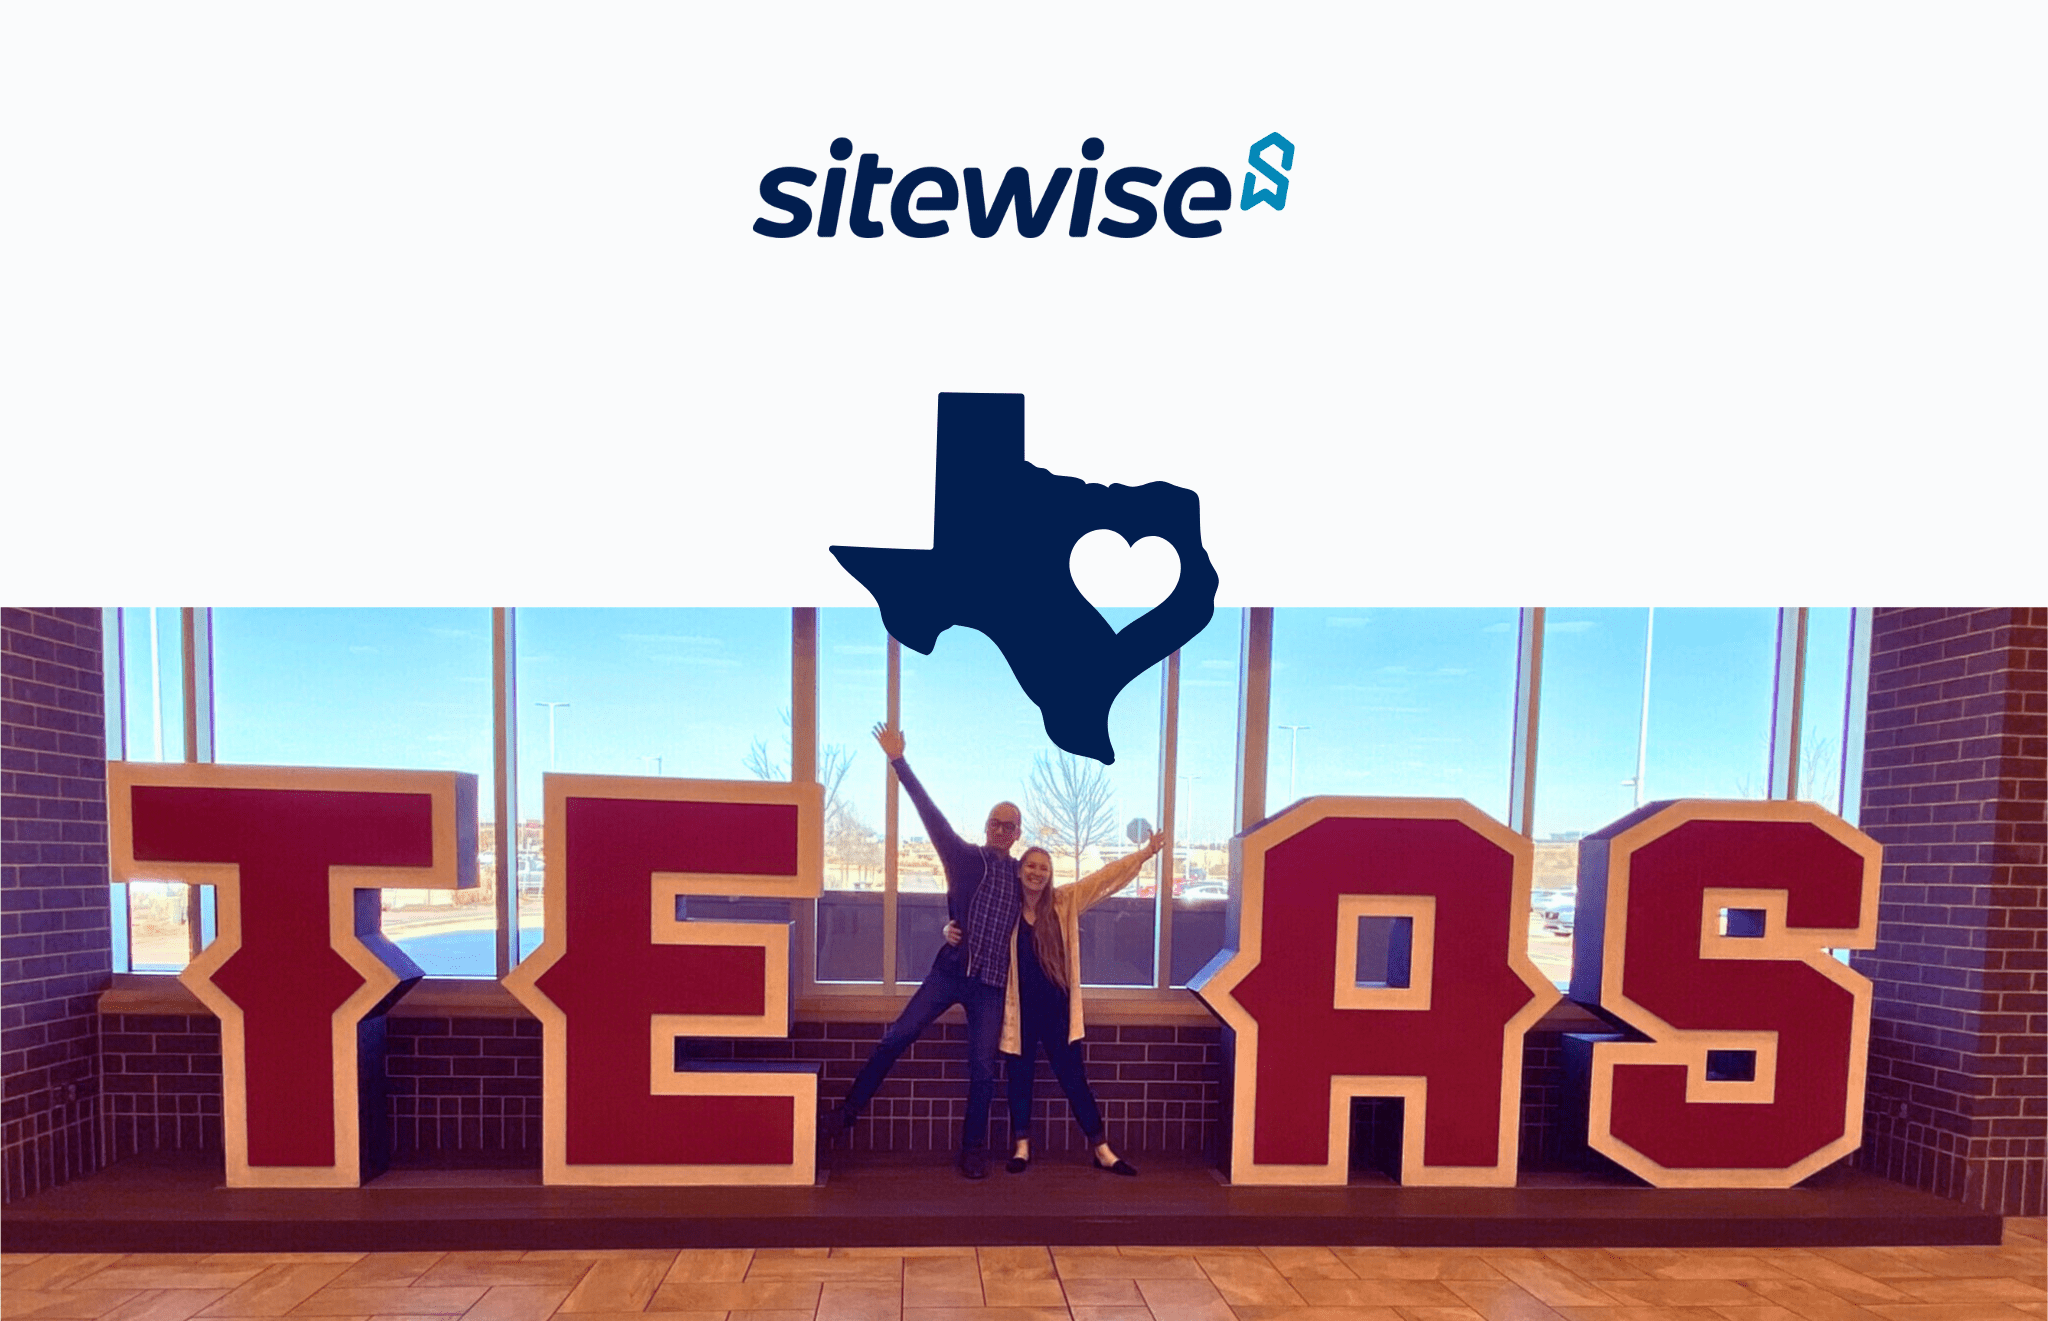 Sitewise Analytics team having a ball in Dallas, Texas